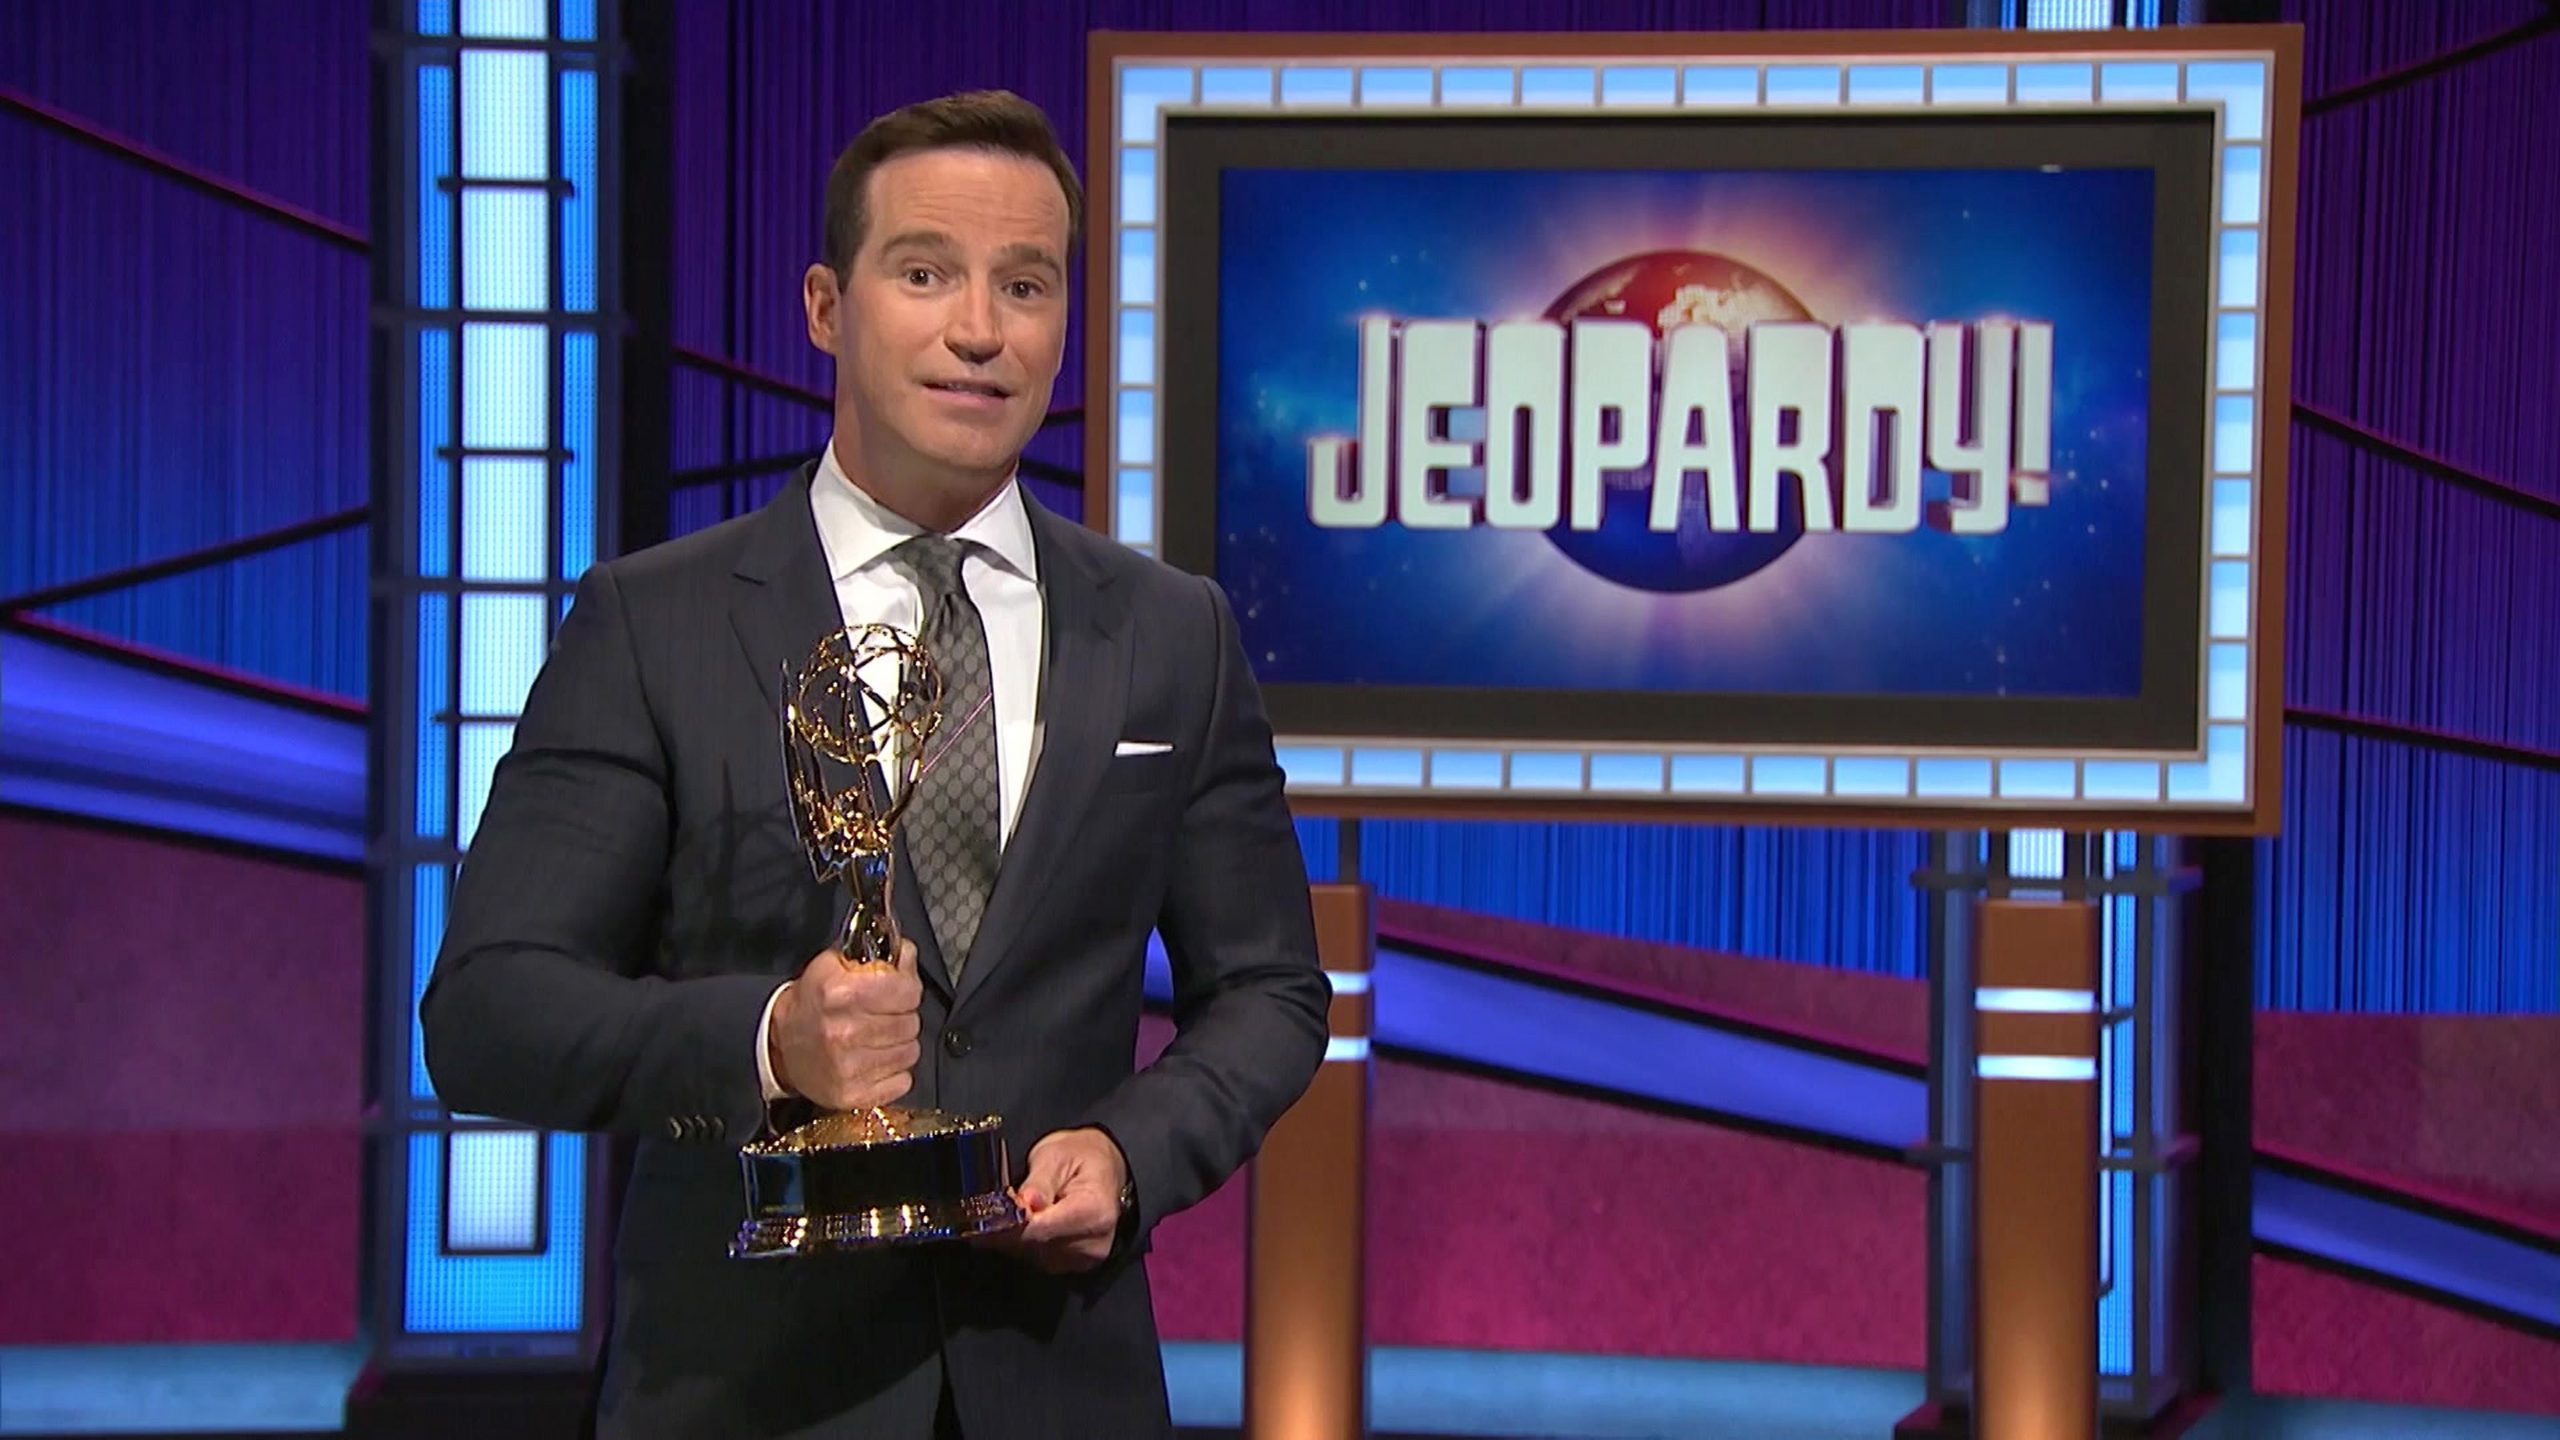 'Jeopardy!' executive producer Mike Richards accepts the show's Emmy award for Outstanding Game Show in 2021.